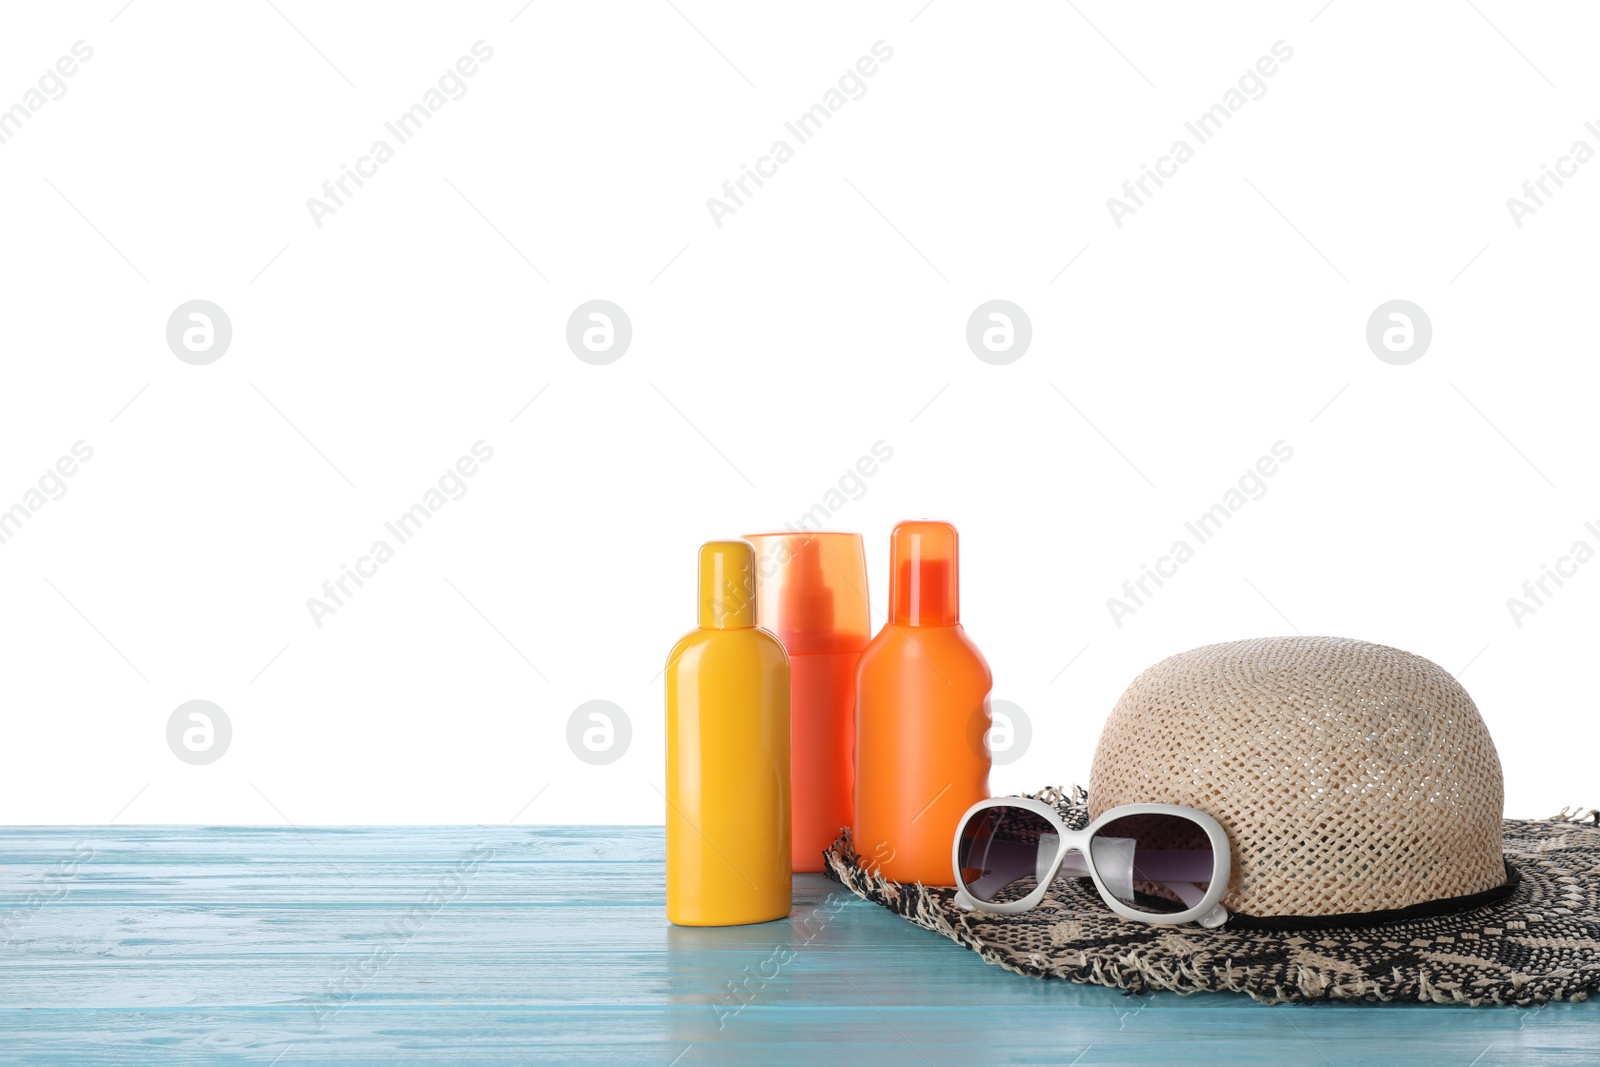 Photo of Sun protection products and beach accessories on blue wooden table against white background. Space for text